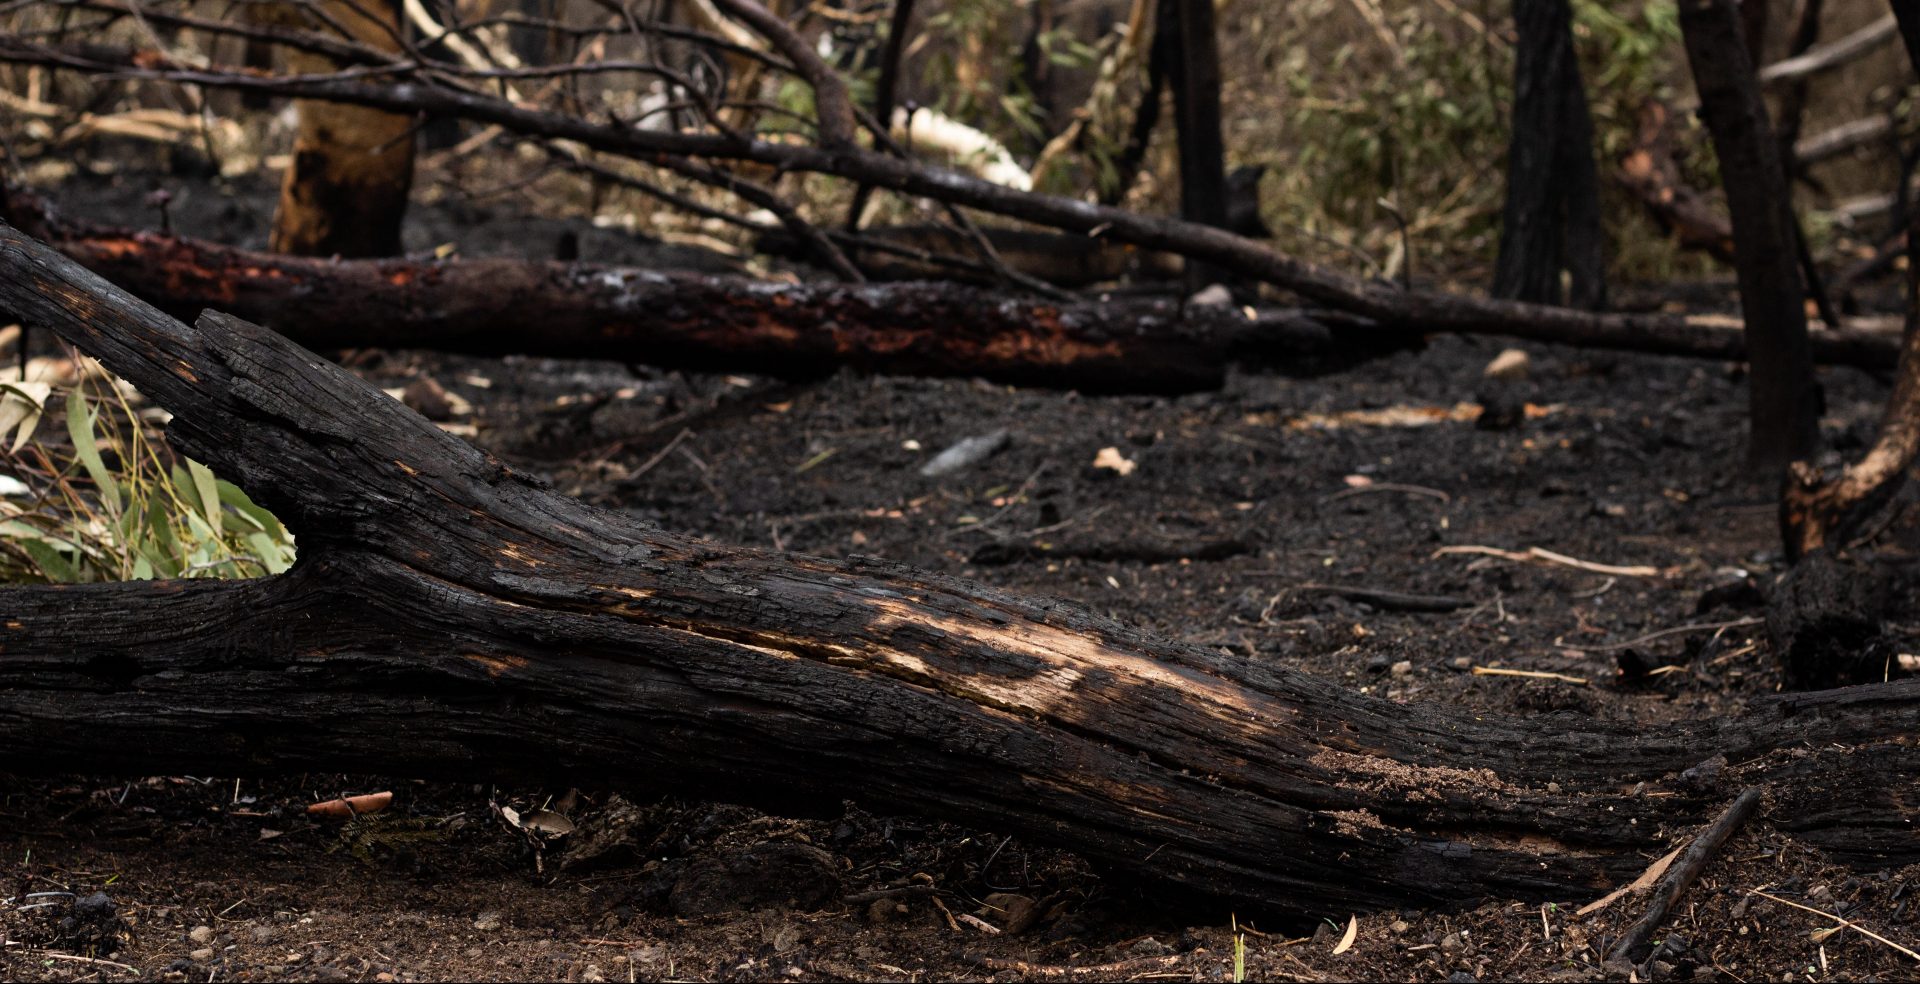 Photo taken of the aftermath of the Voyager Point bushfire near Sydney, Australia, on January 7, 2020.

For more photos, go to www.jordanbrownfilms.com